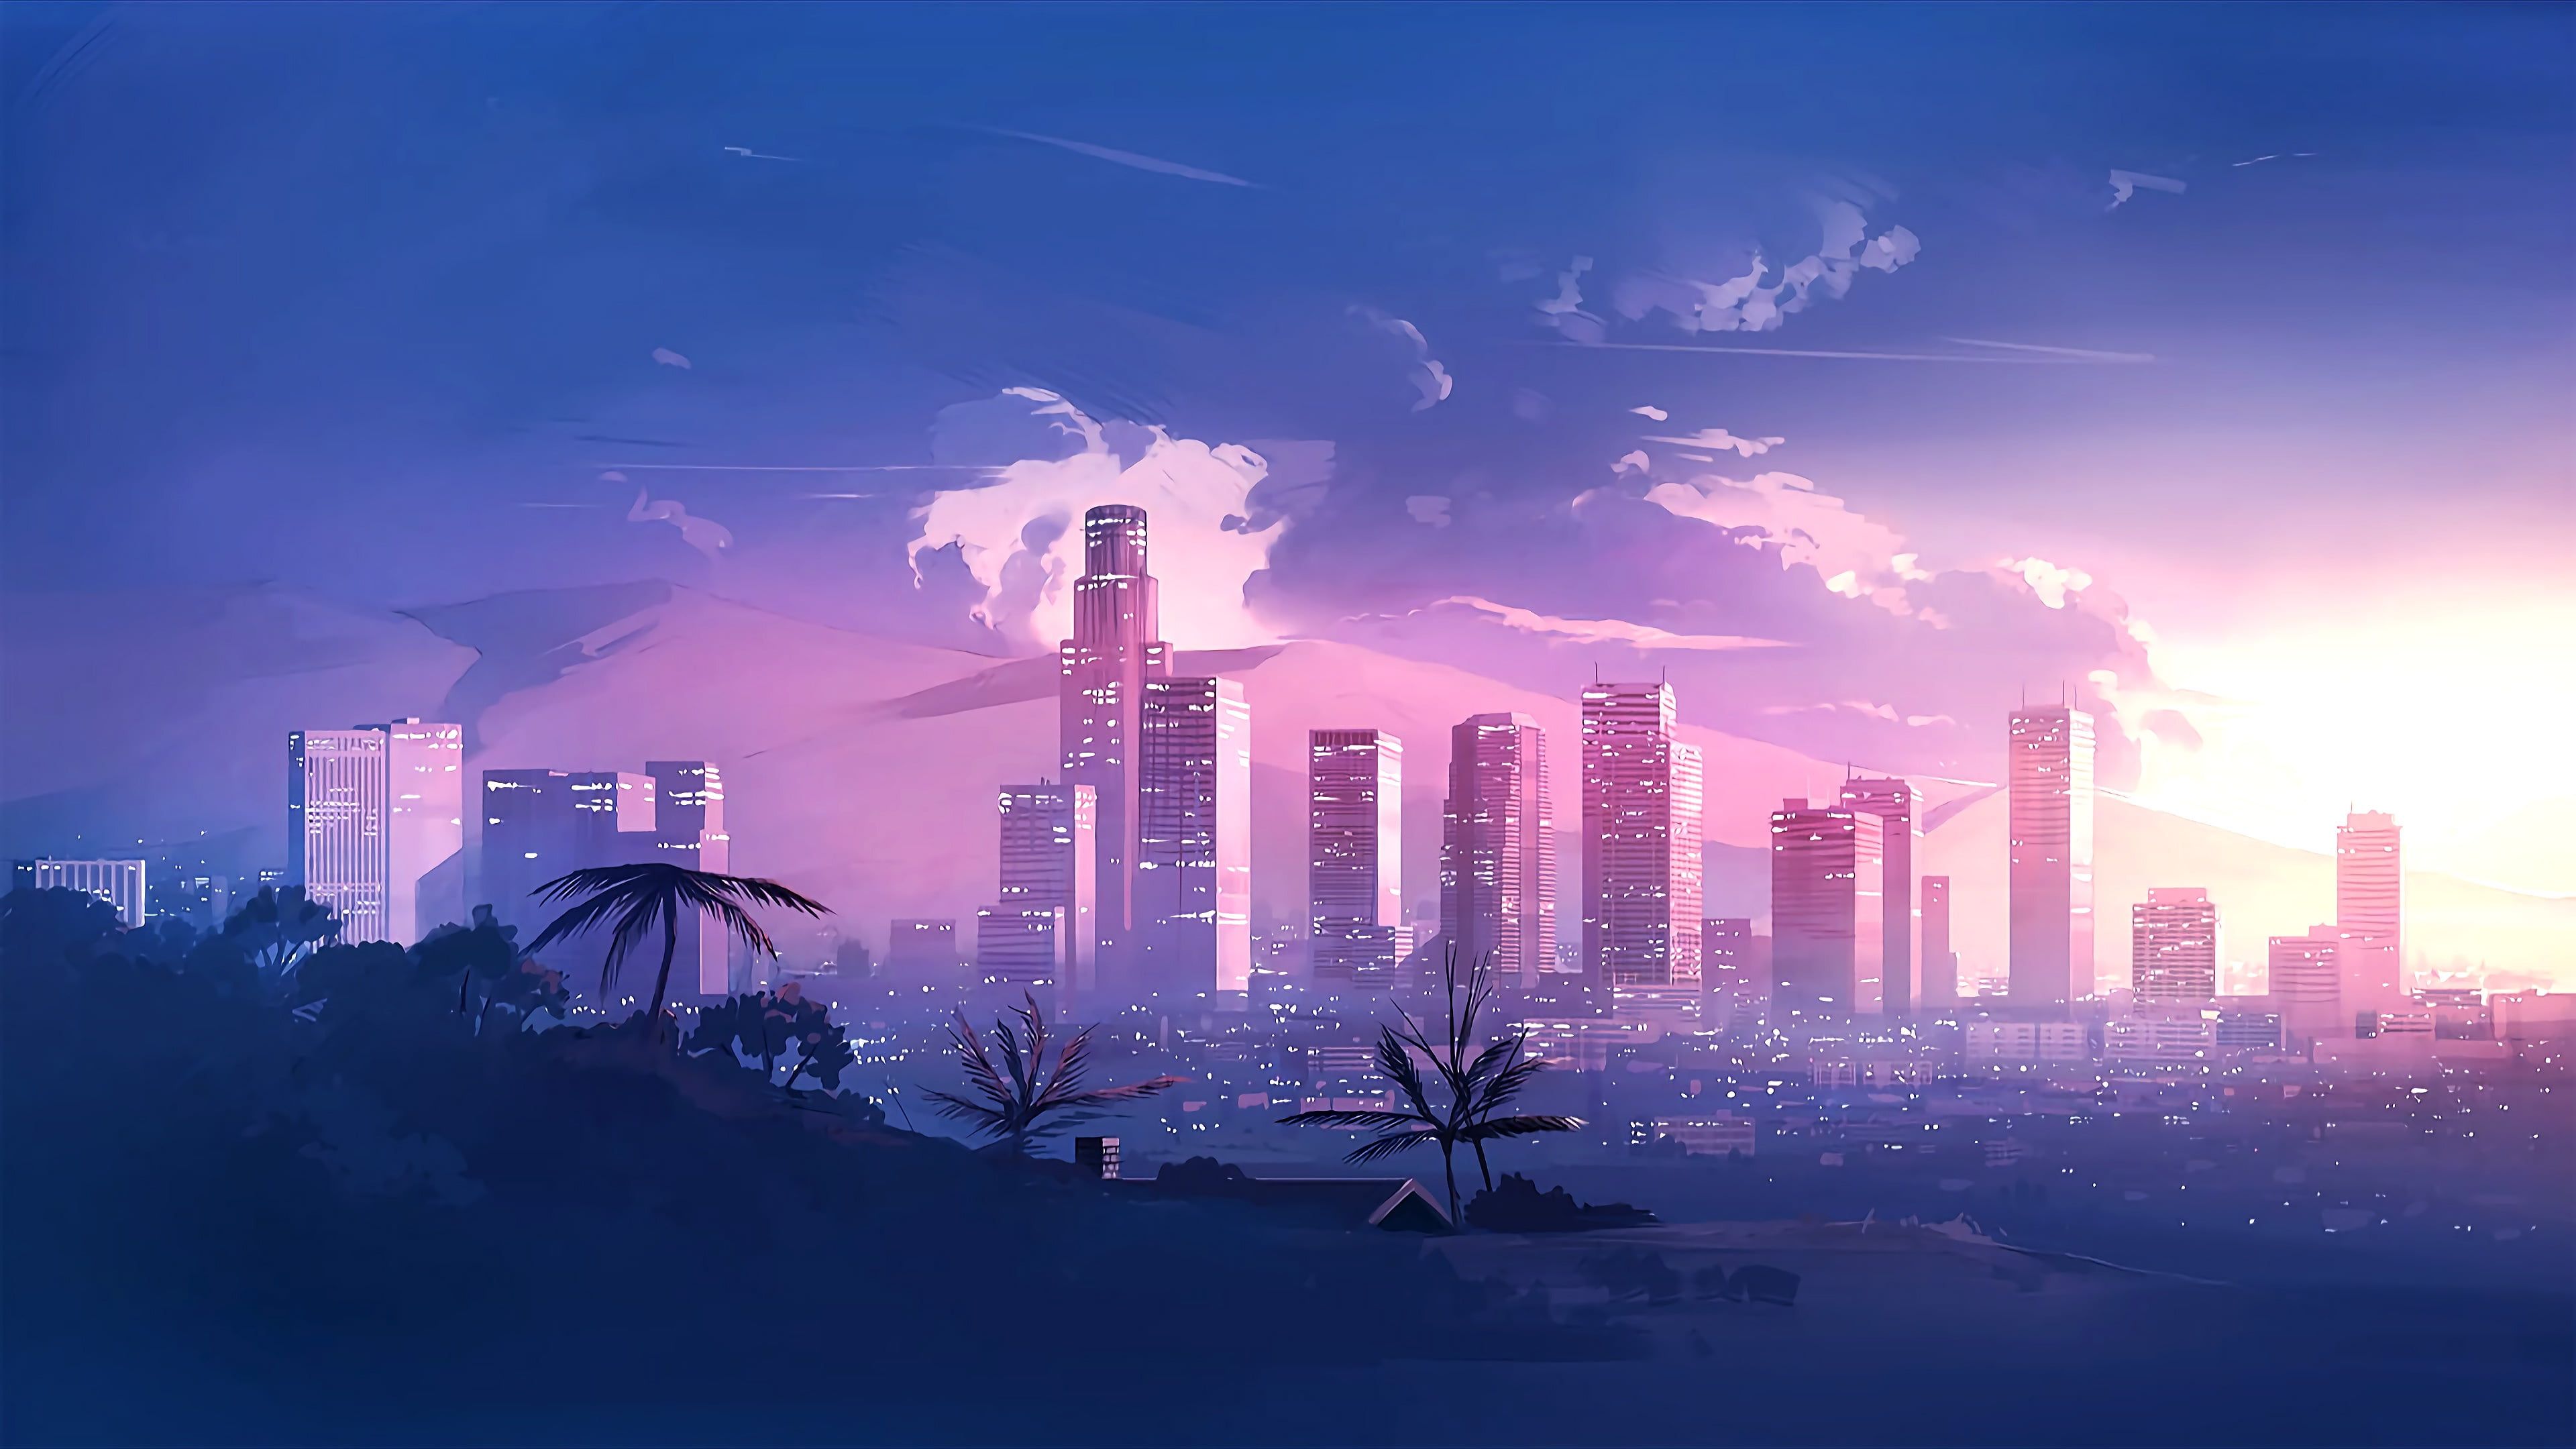 Anime Retrowave City Wallpapers - Wallpaper Cave